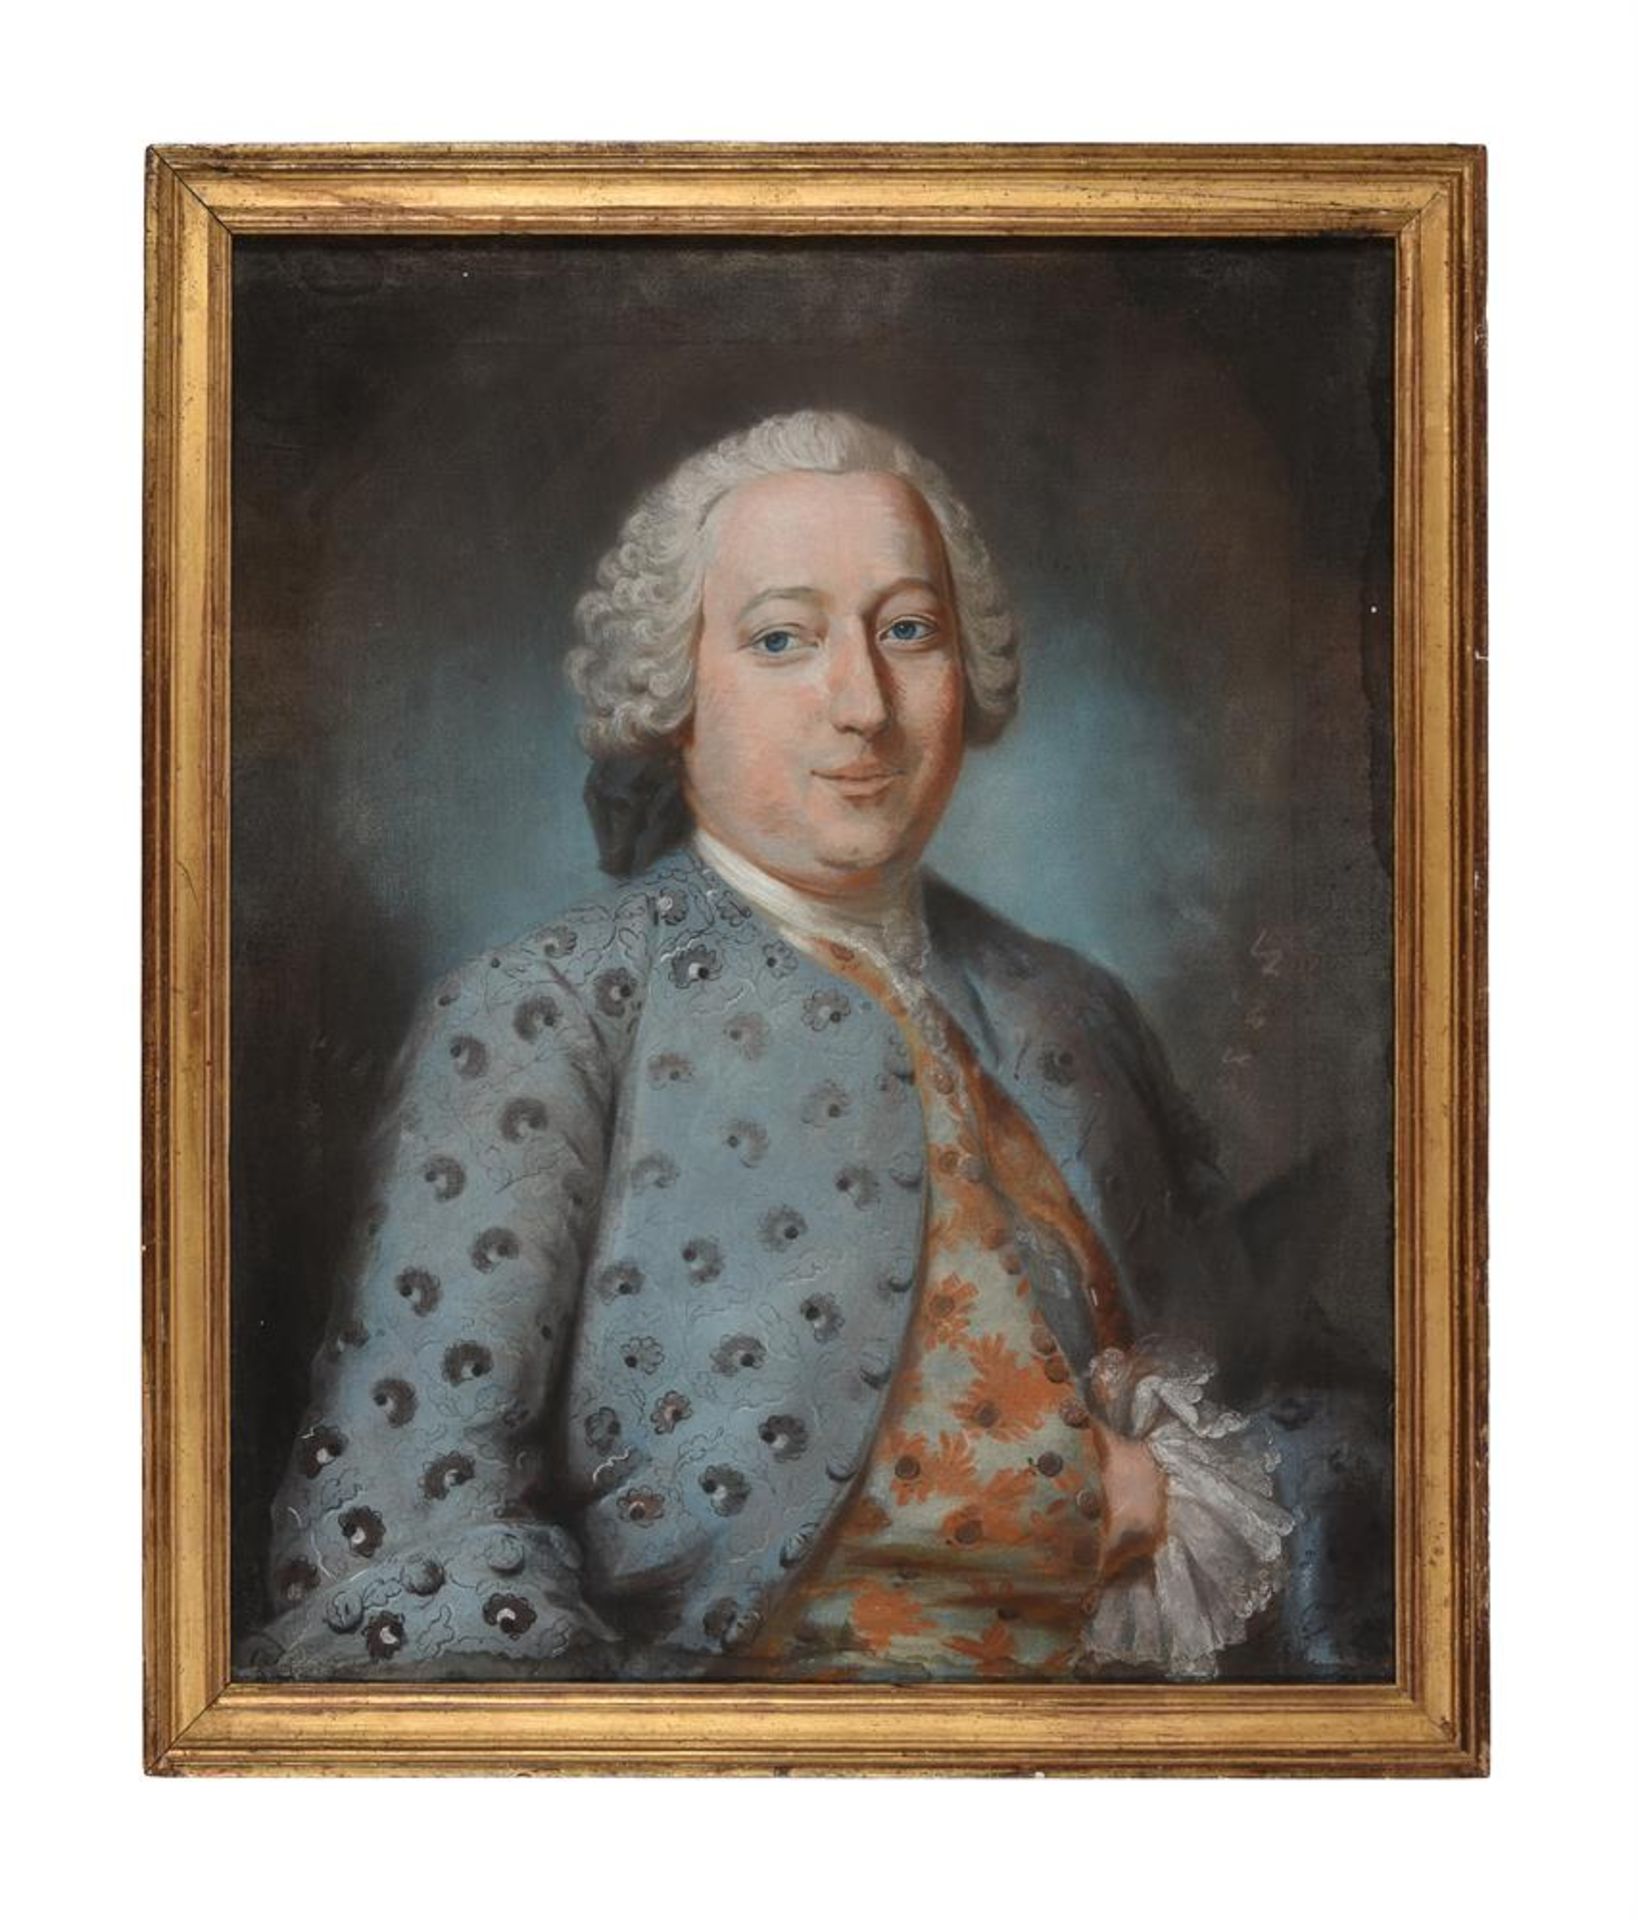 ATTRIBUTED TO LEON- PASCAL GLAIN (FRENCH 18TH CENTURY), PORTRAIT OF A GENTLEMAN IN A BLUE COAT - Image 2 of 3